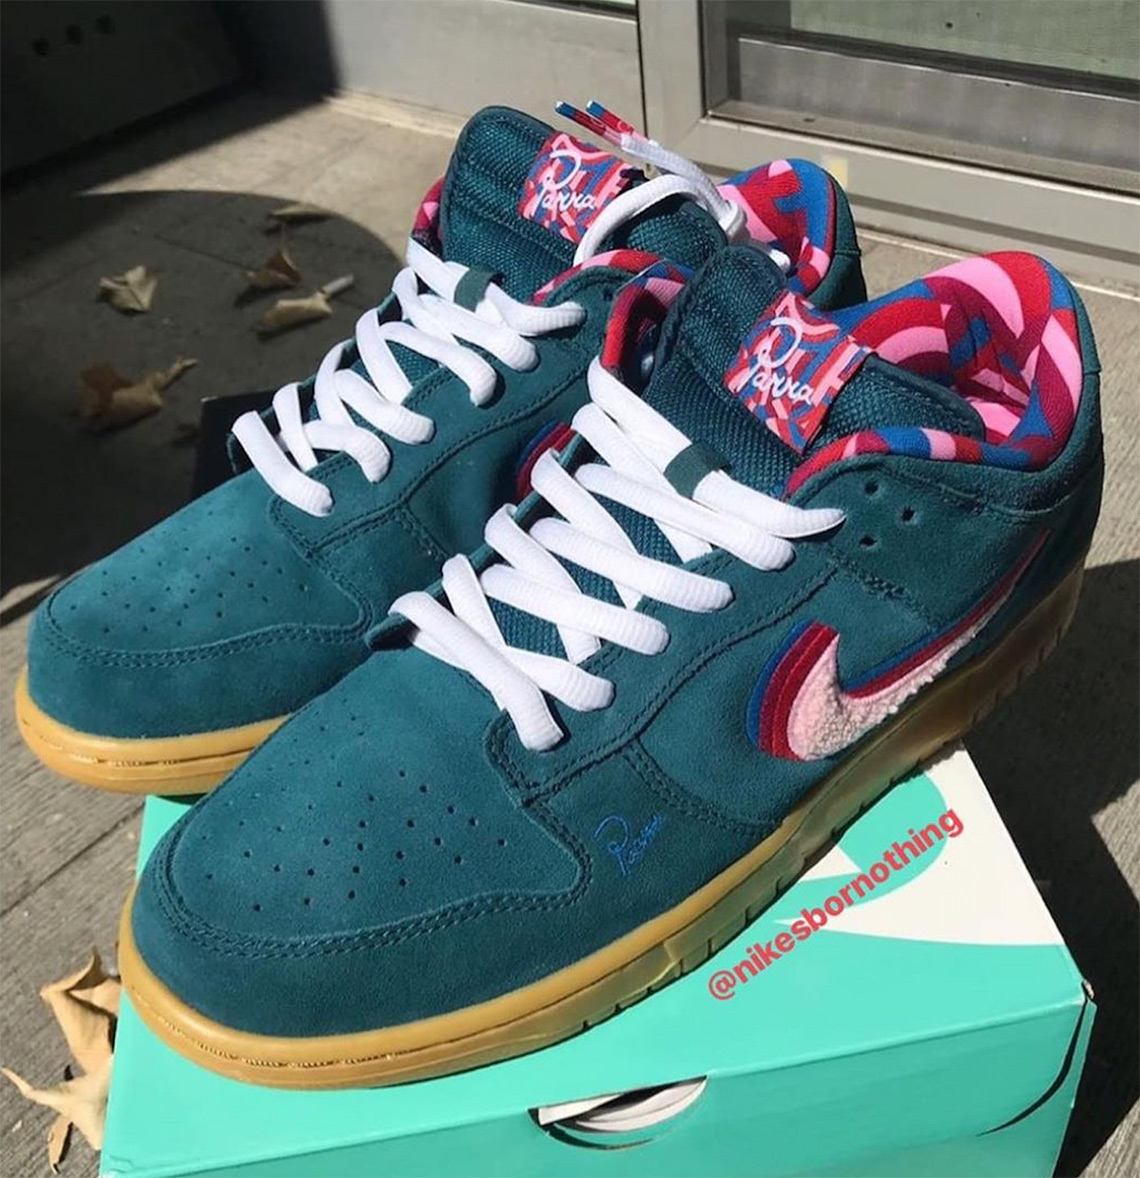 Parra Nike Sb Dunk Friends And Family Teal 1